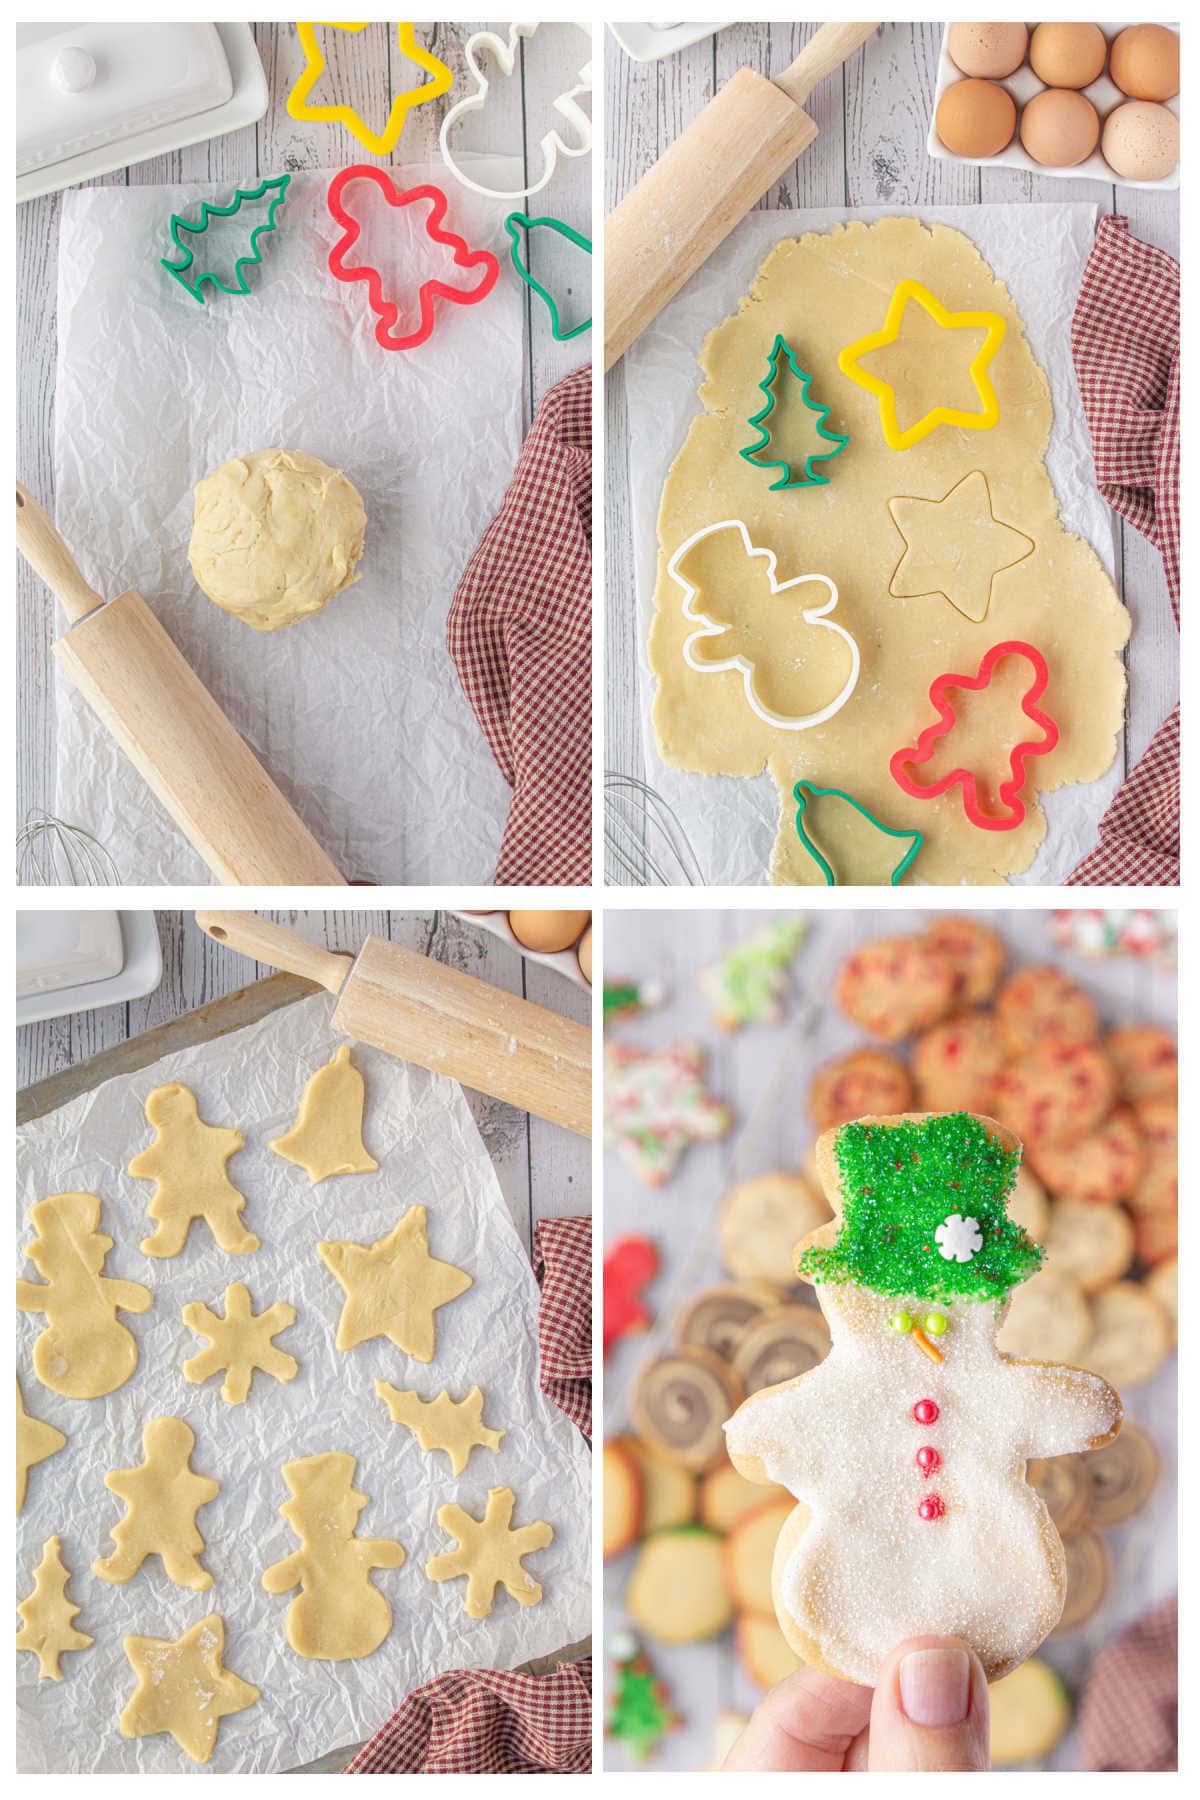 Four overhead images depicting the instructions to stamp, form, and decorate shaped sugar cookies.